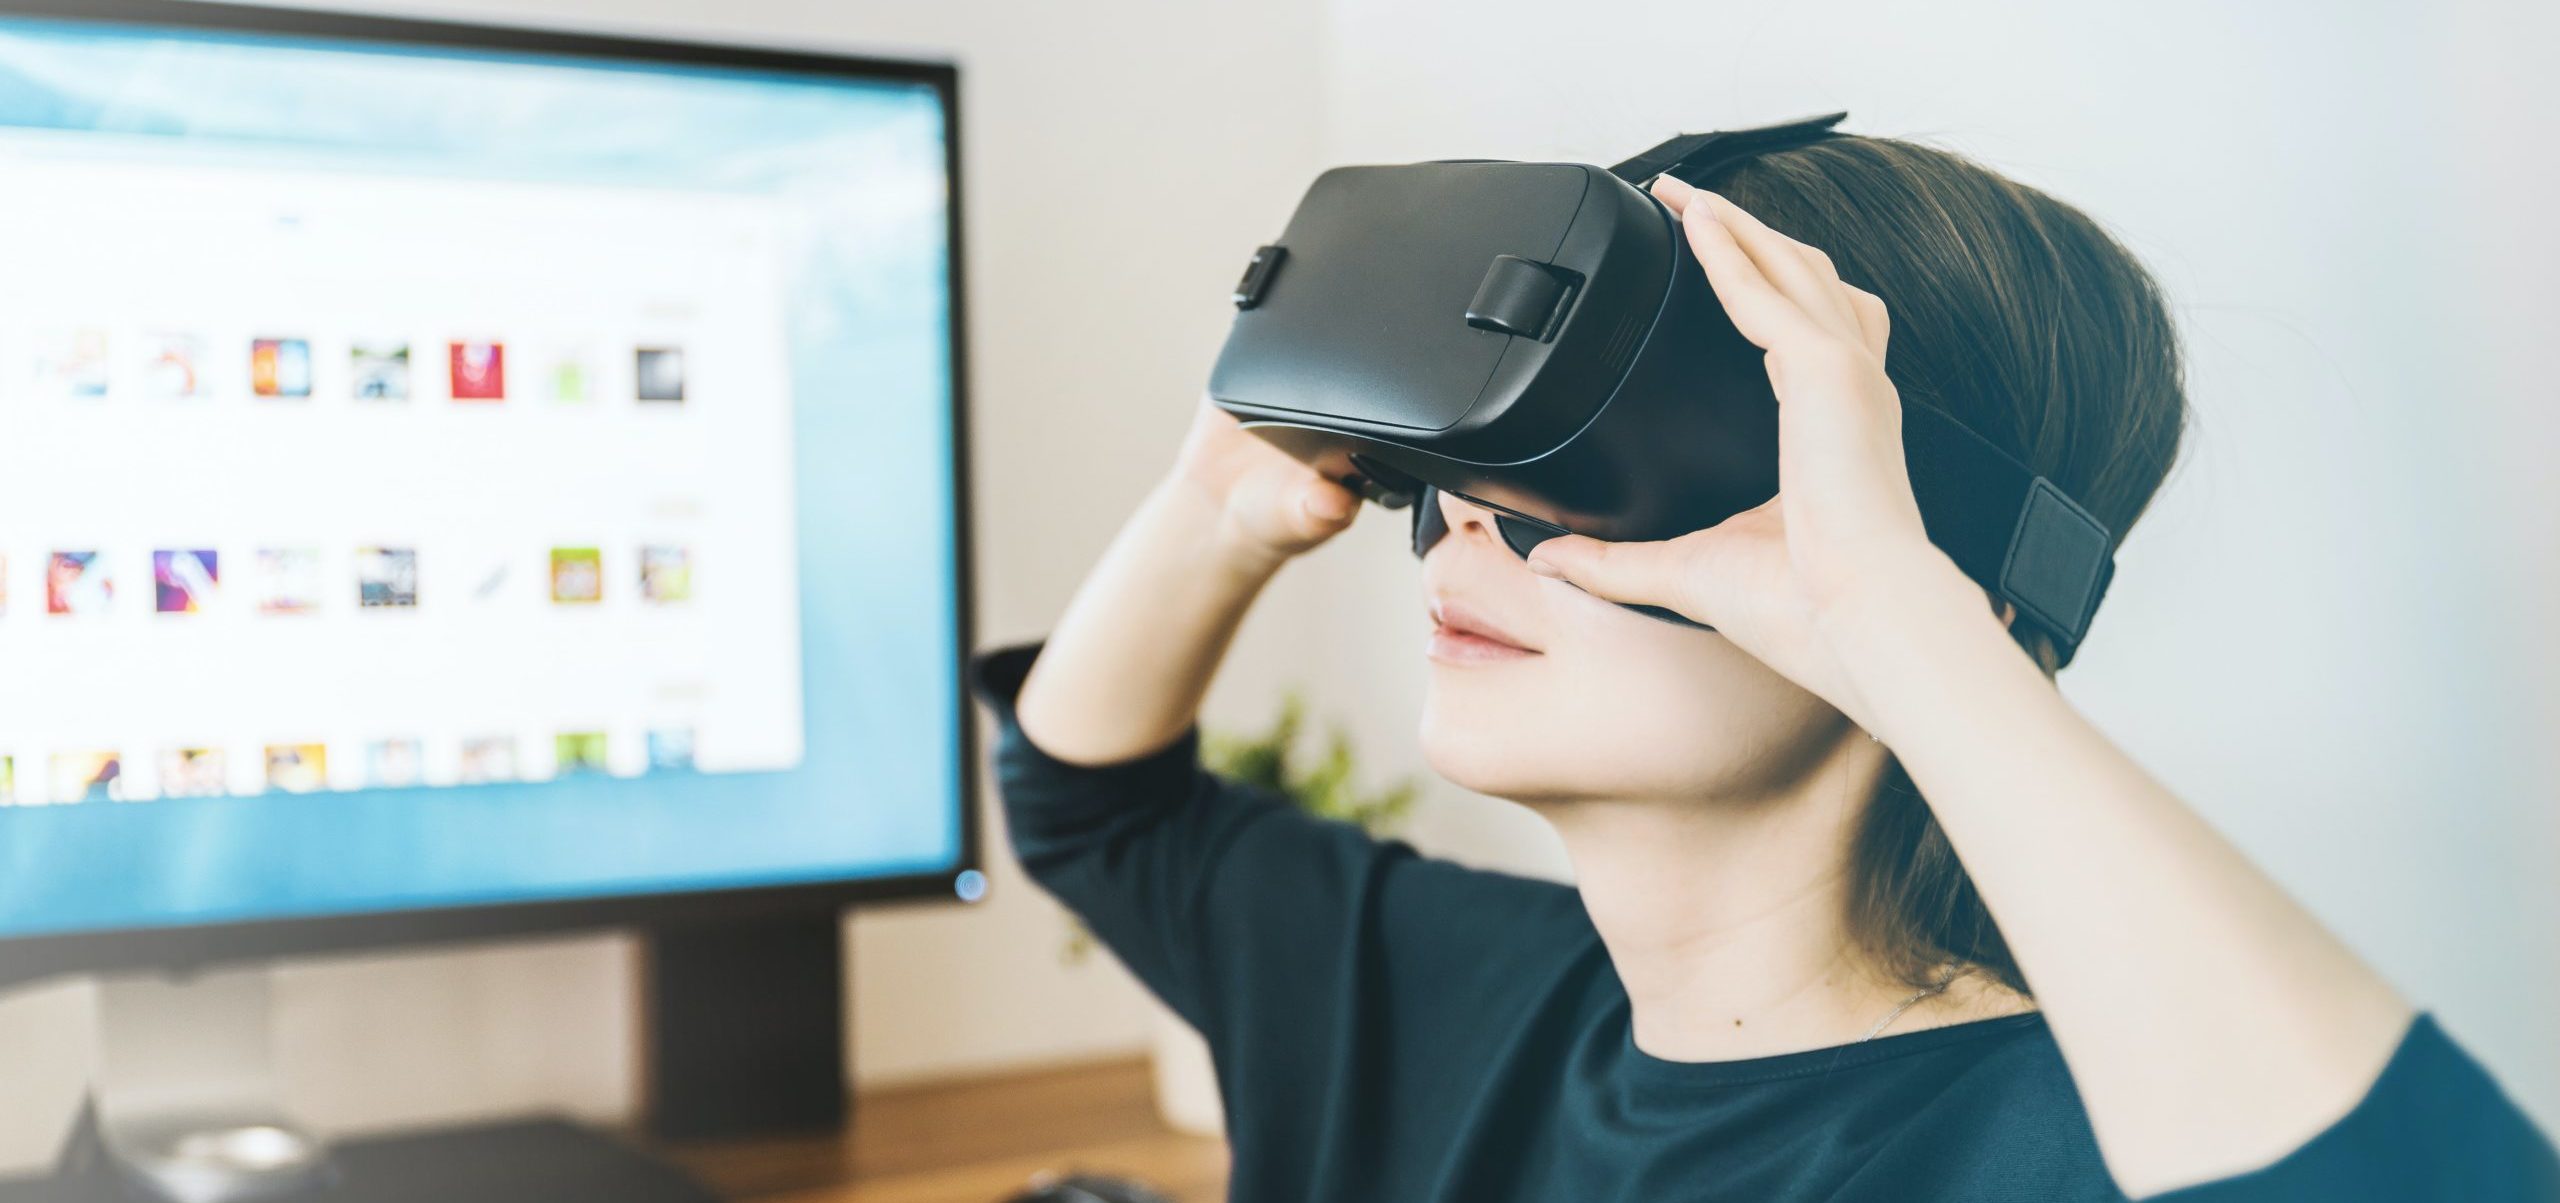 Immersive learning with VR